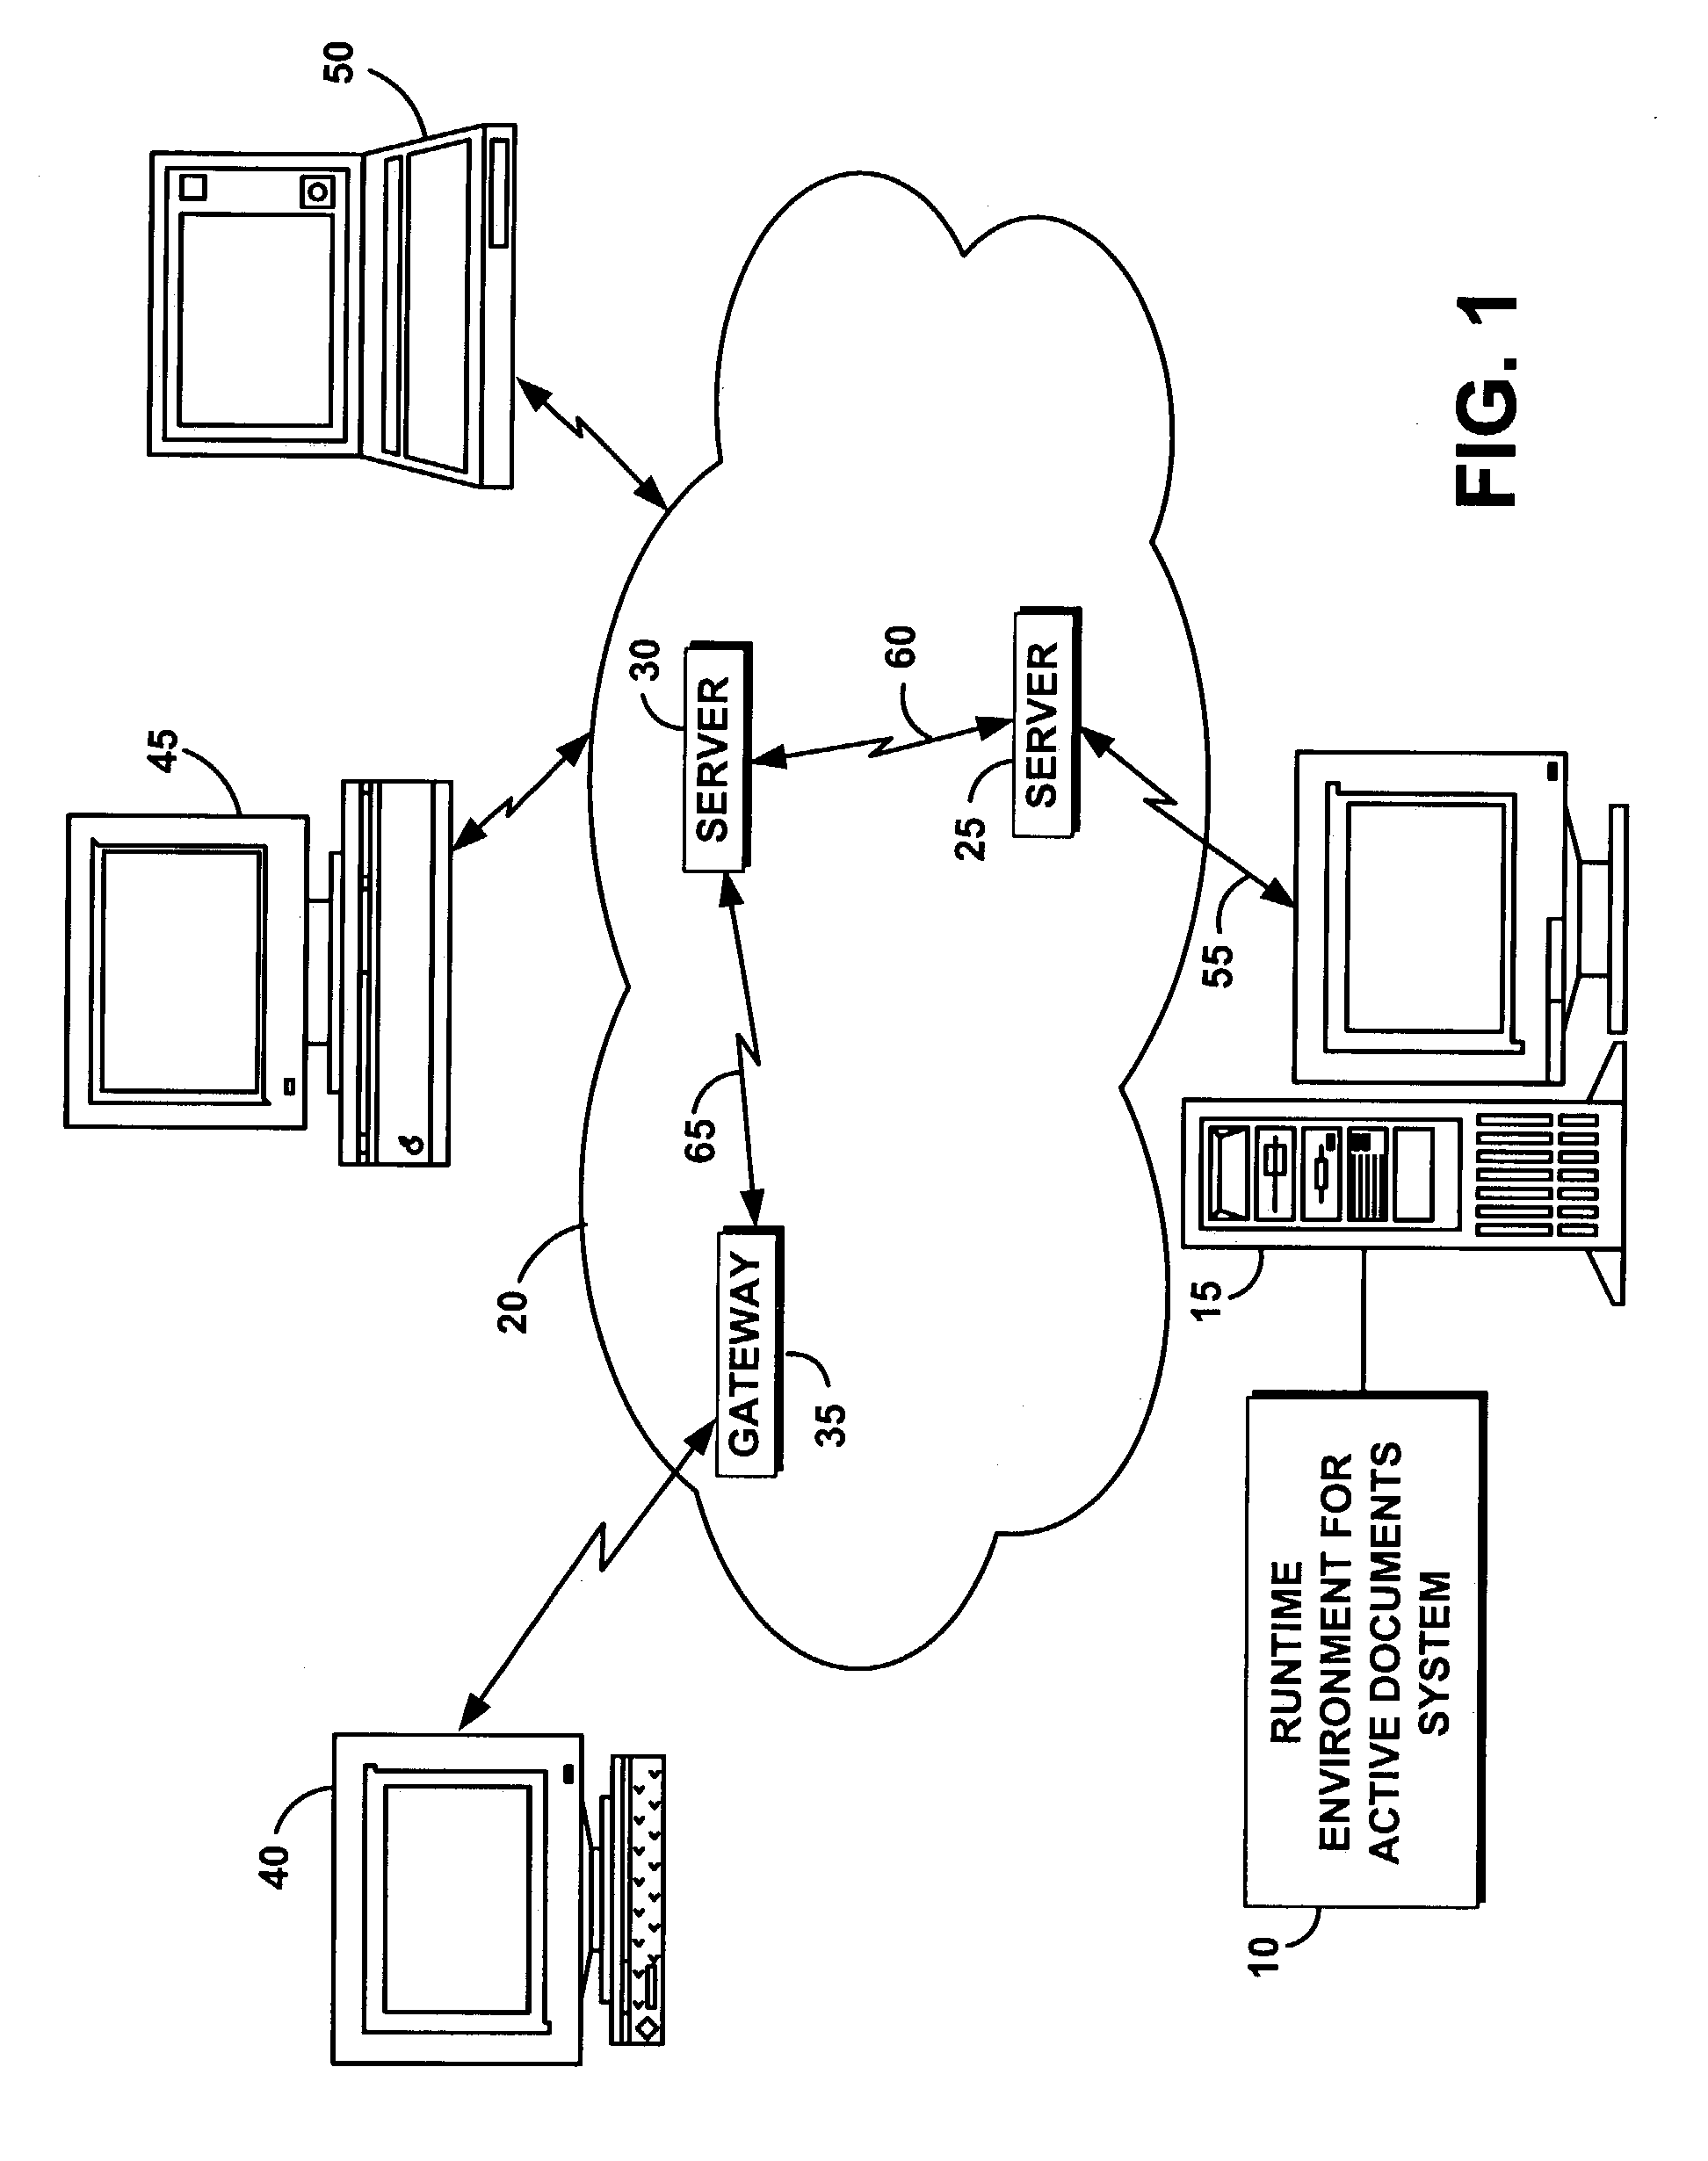 System and method for providing a runtime environment for active web based document resources